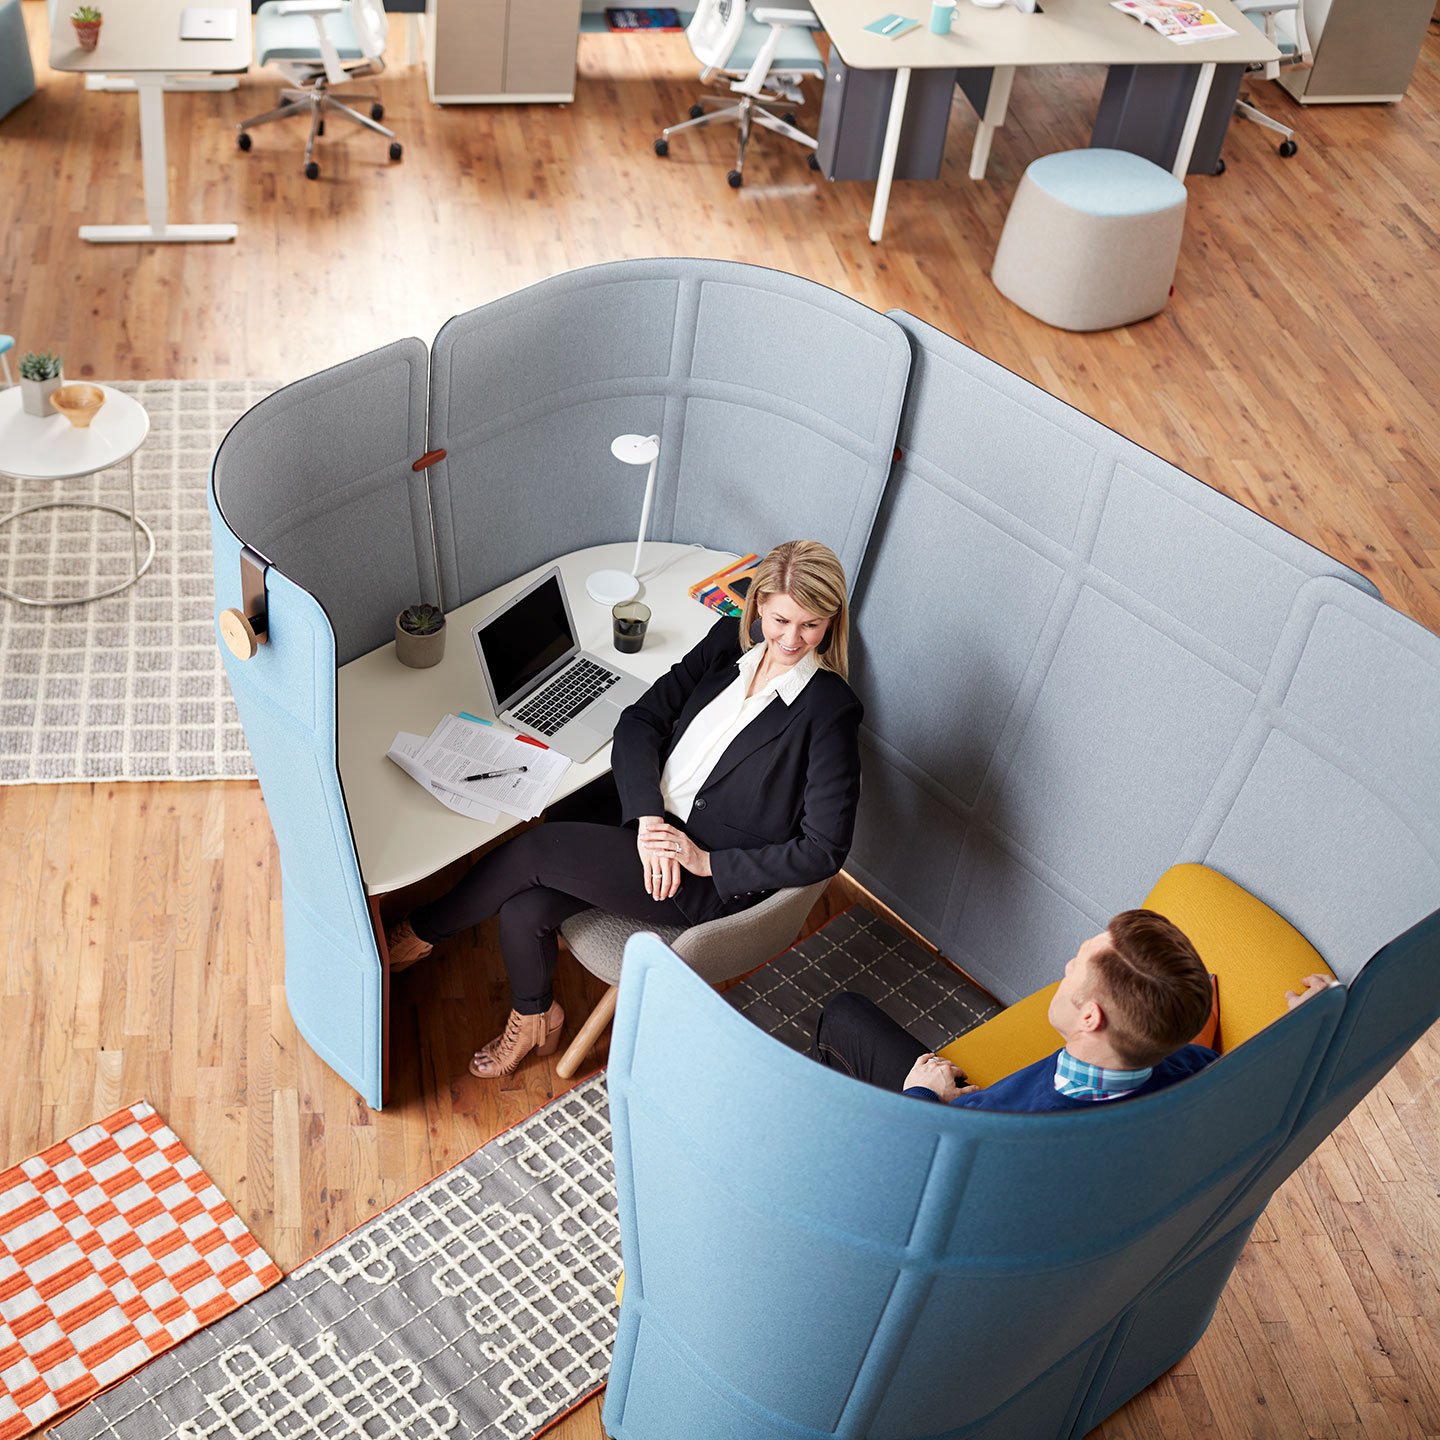 Haworth Openest Privacy Booth in blue color and grey inside with white desk and yellow seating with employees working inside the booth in open office space